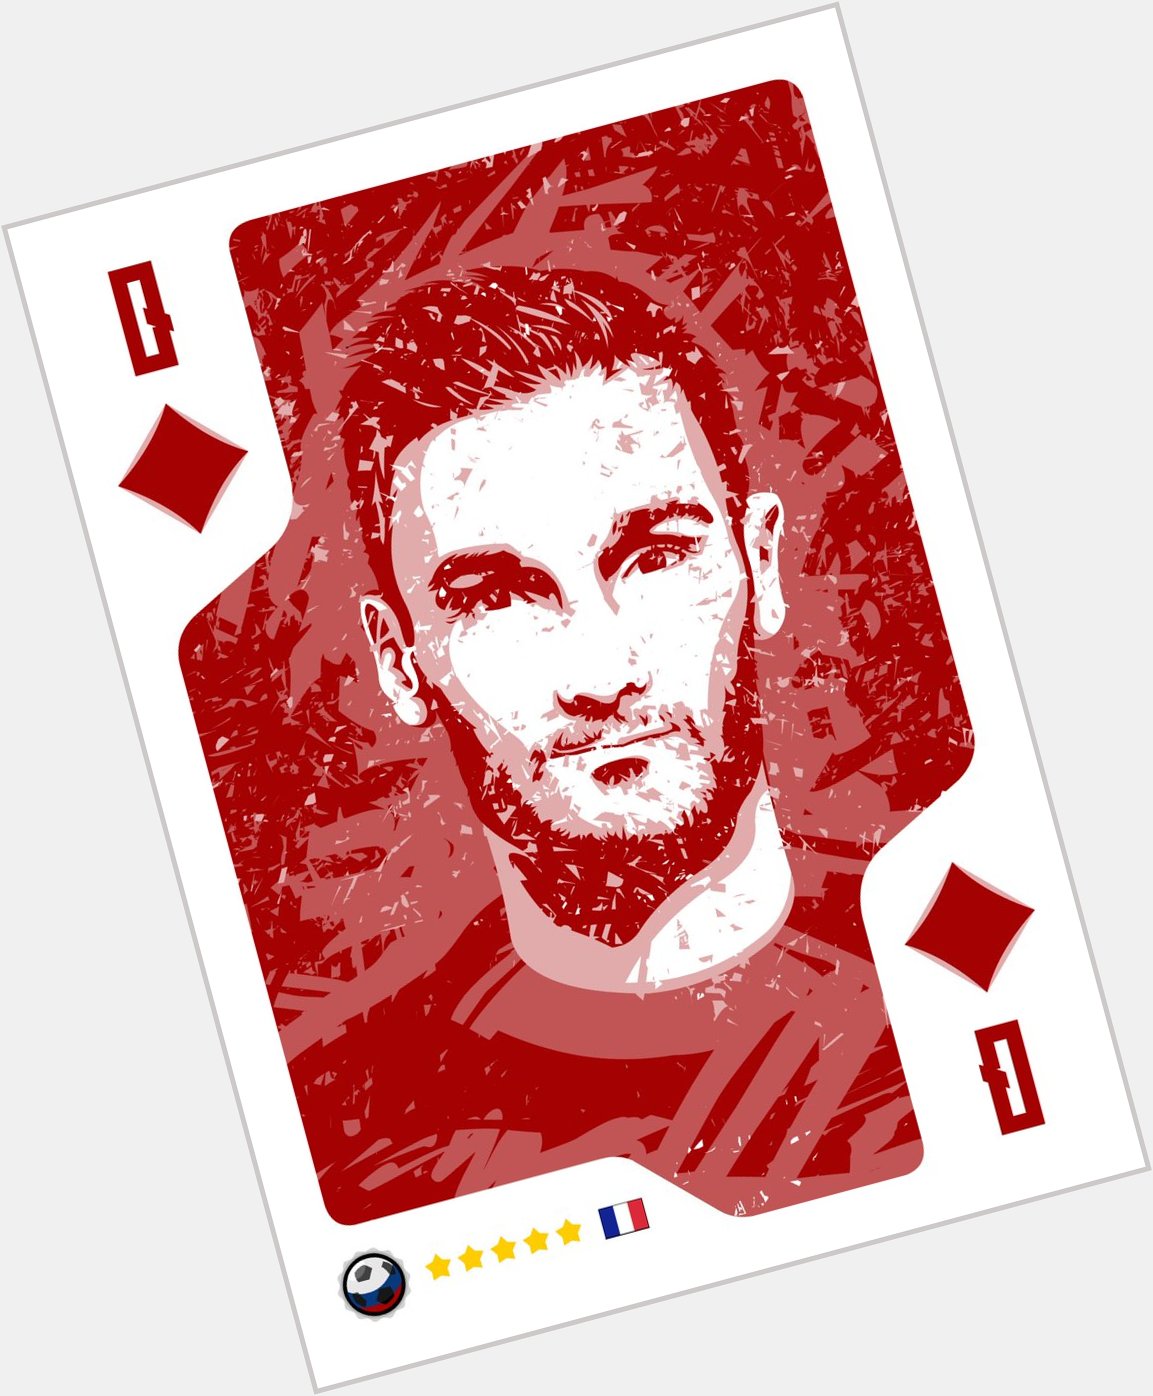 In amongst this goal frenzy, happy 32nd birthday to Hugo Lloris.   